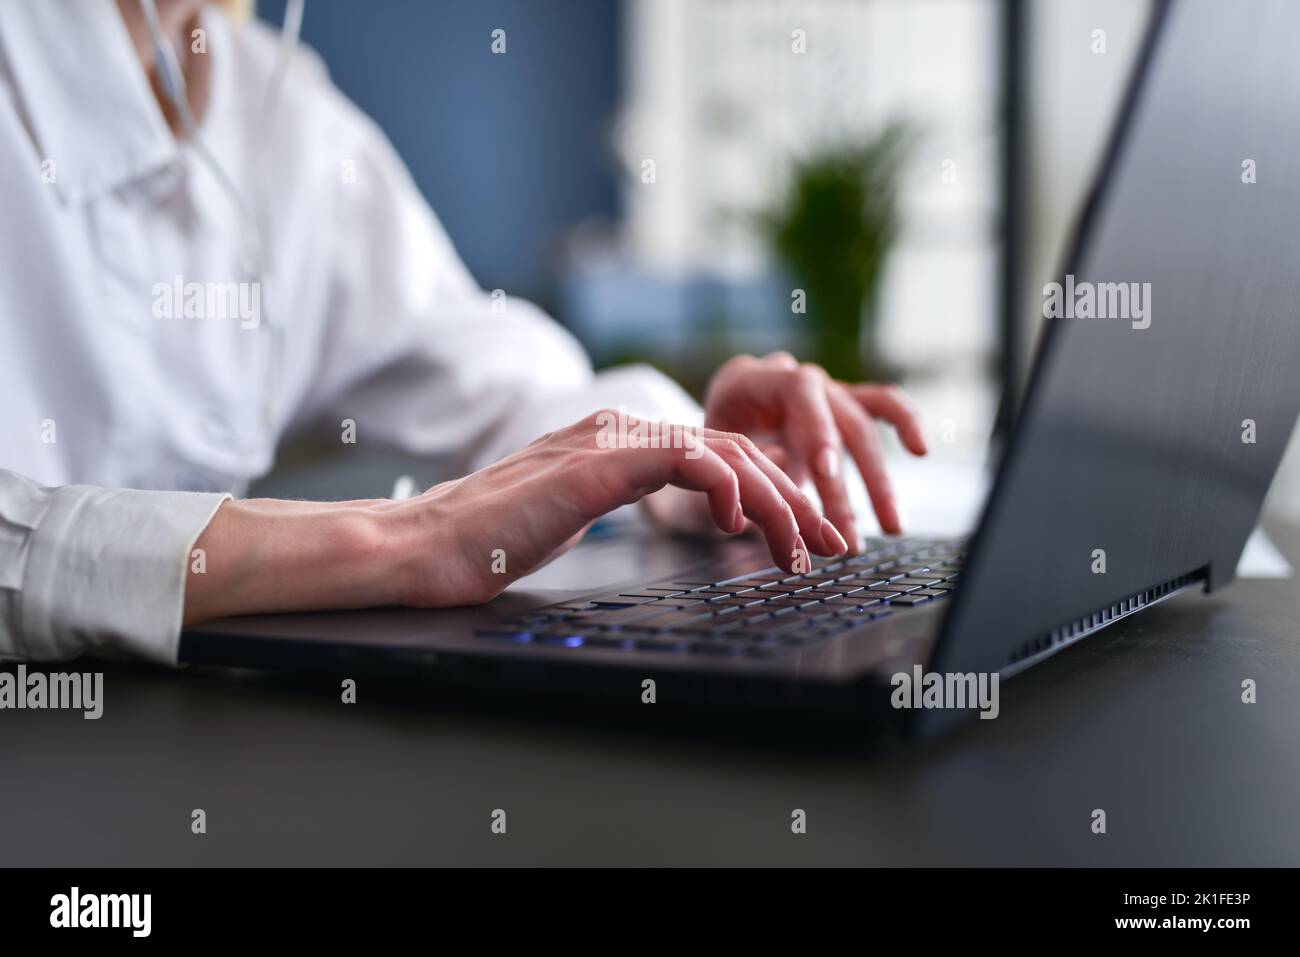 Woman working on her laptop Close-up of hands on keyboard Stock Photo